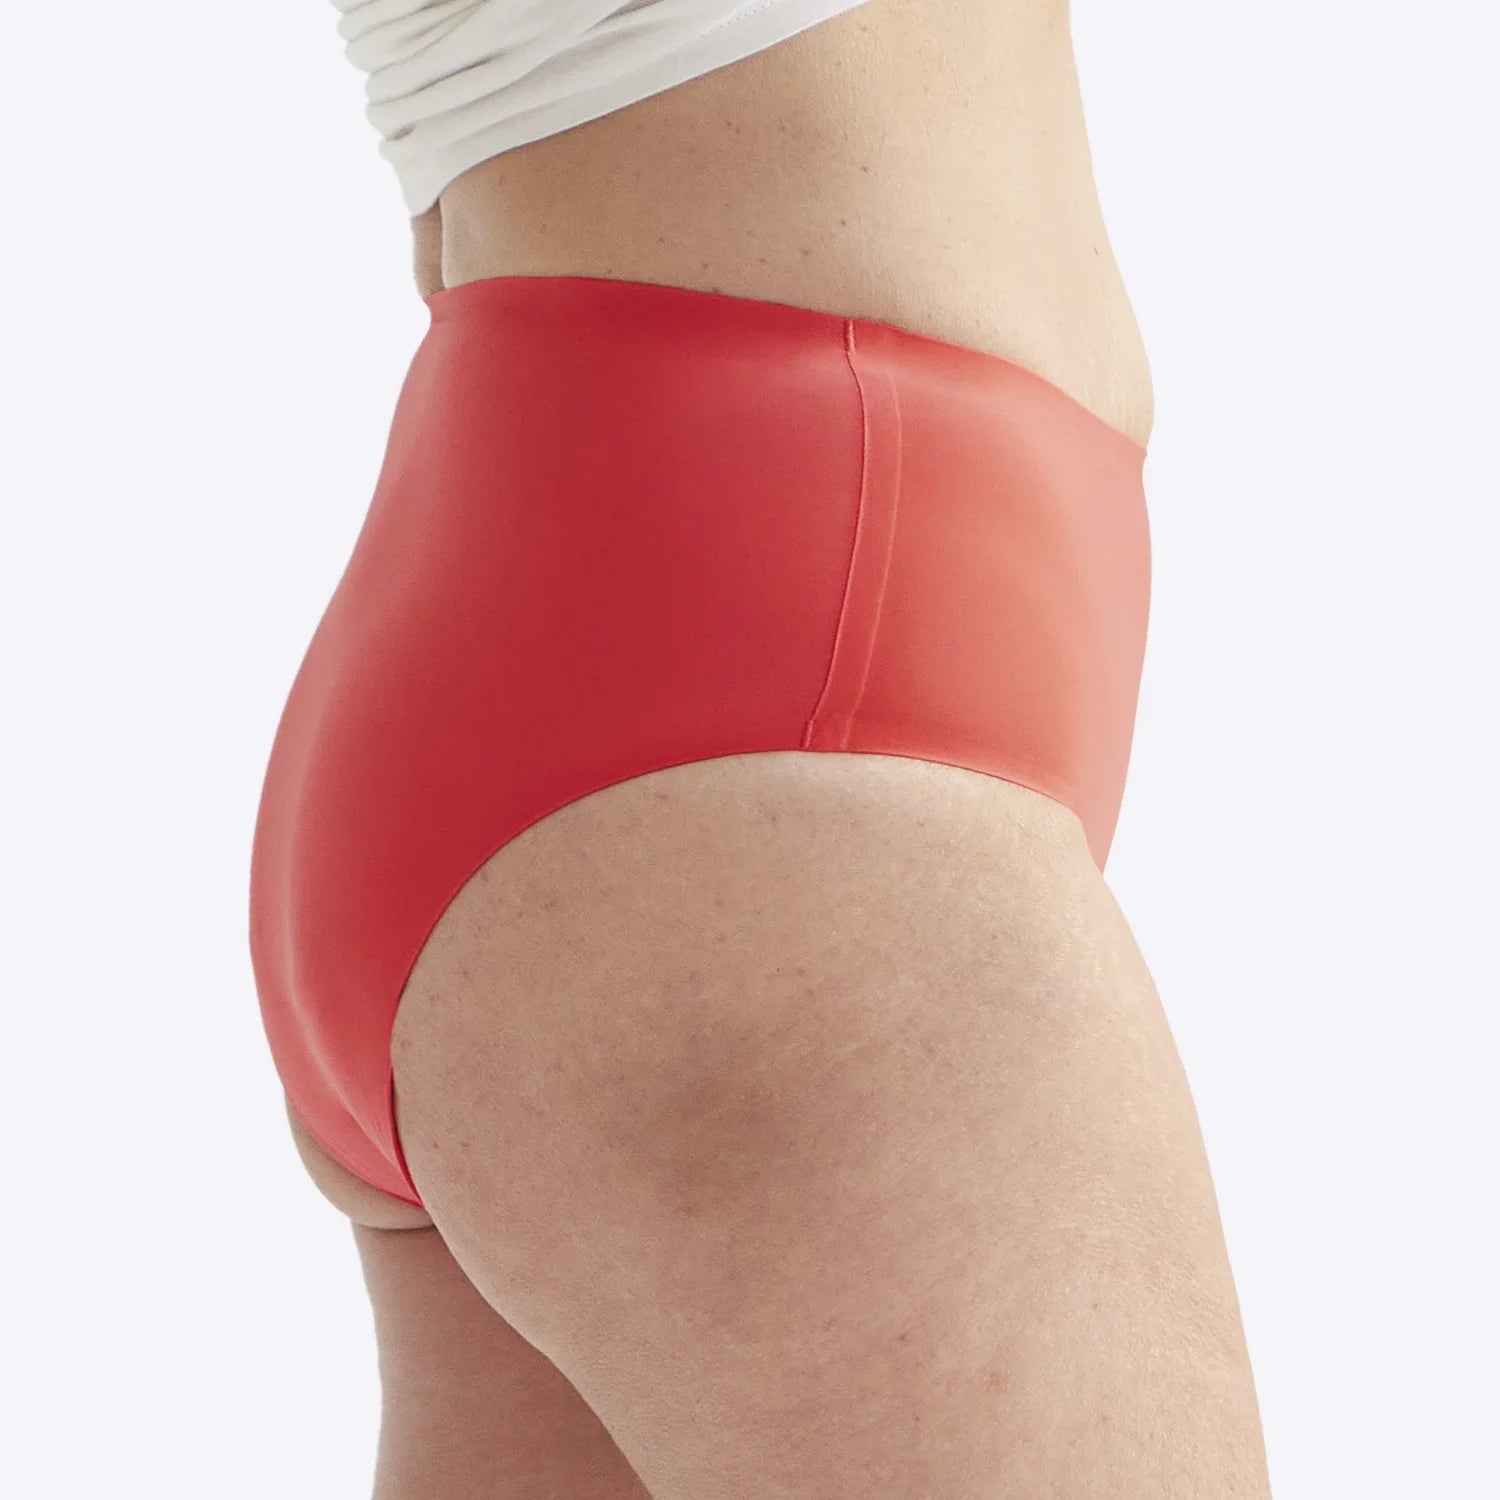 DryTech midi brief coral pink - side